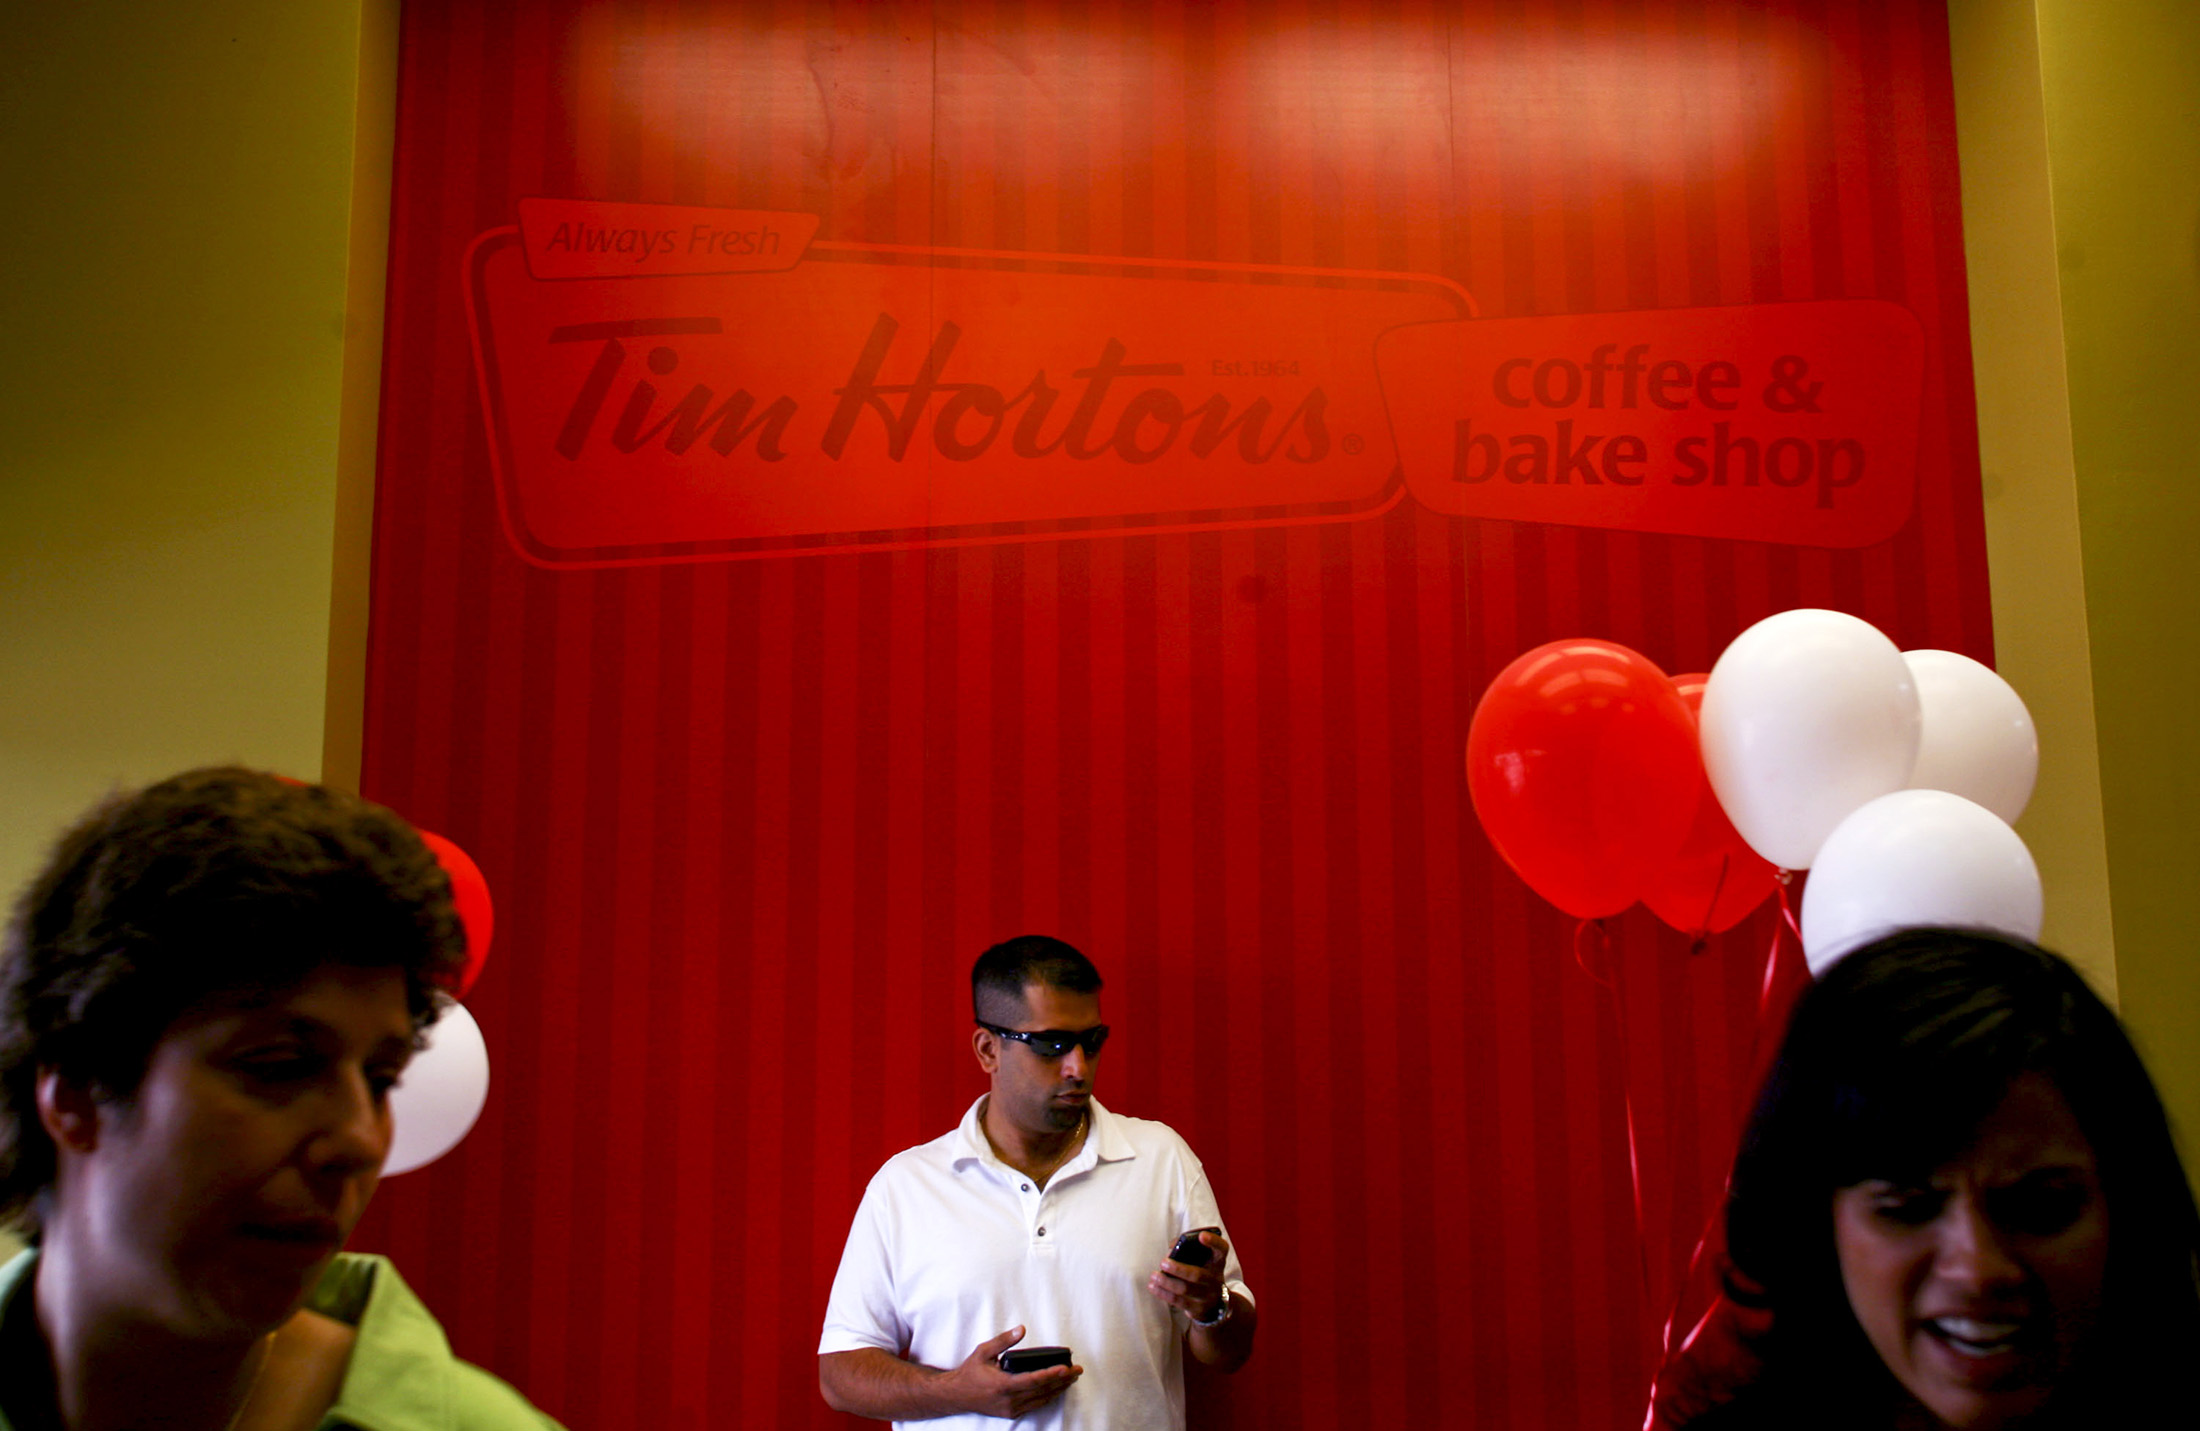 Tim Hortons now in India: Canada's popular coffee brand opened in these  places